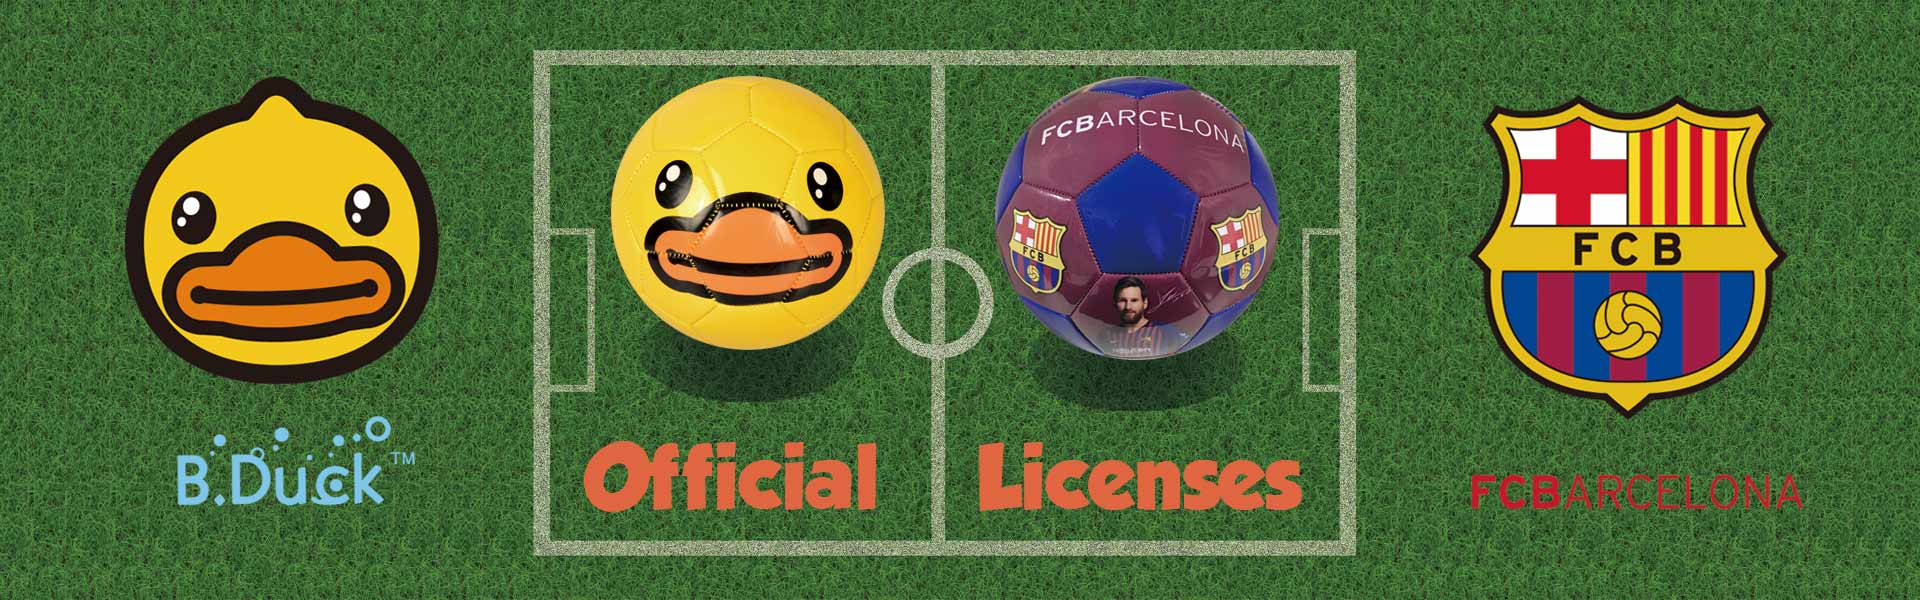 offiical license for B.duck and FC Bacelona